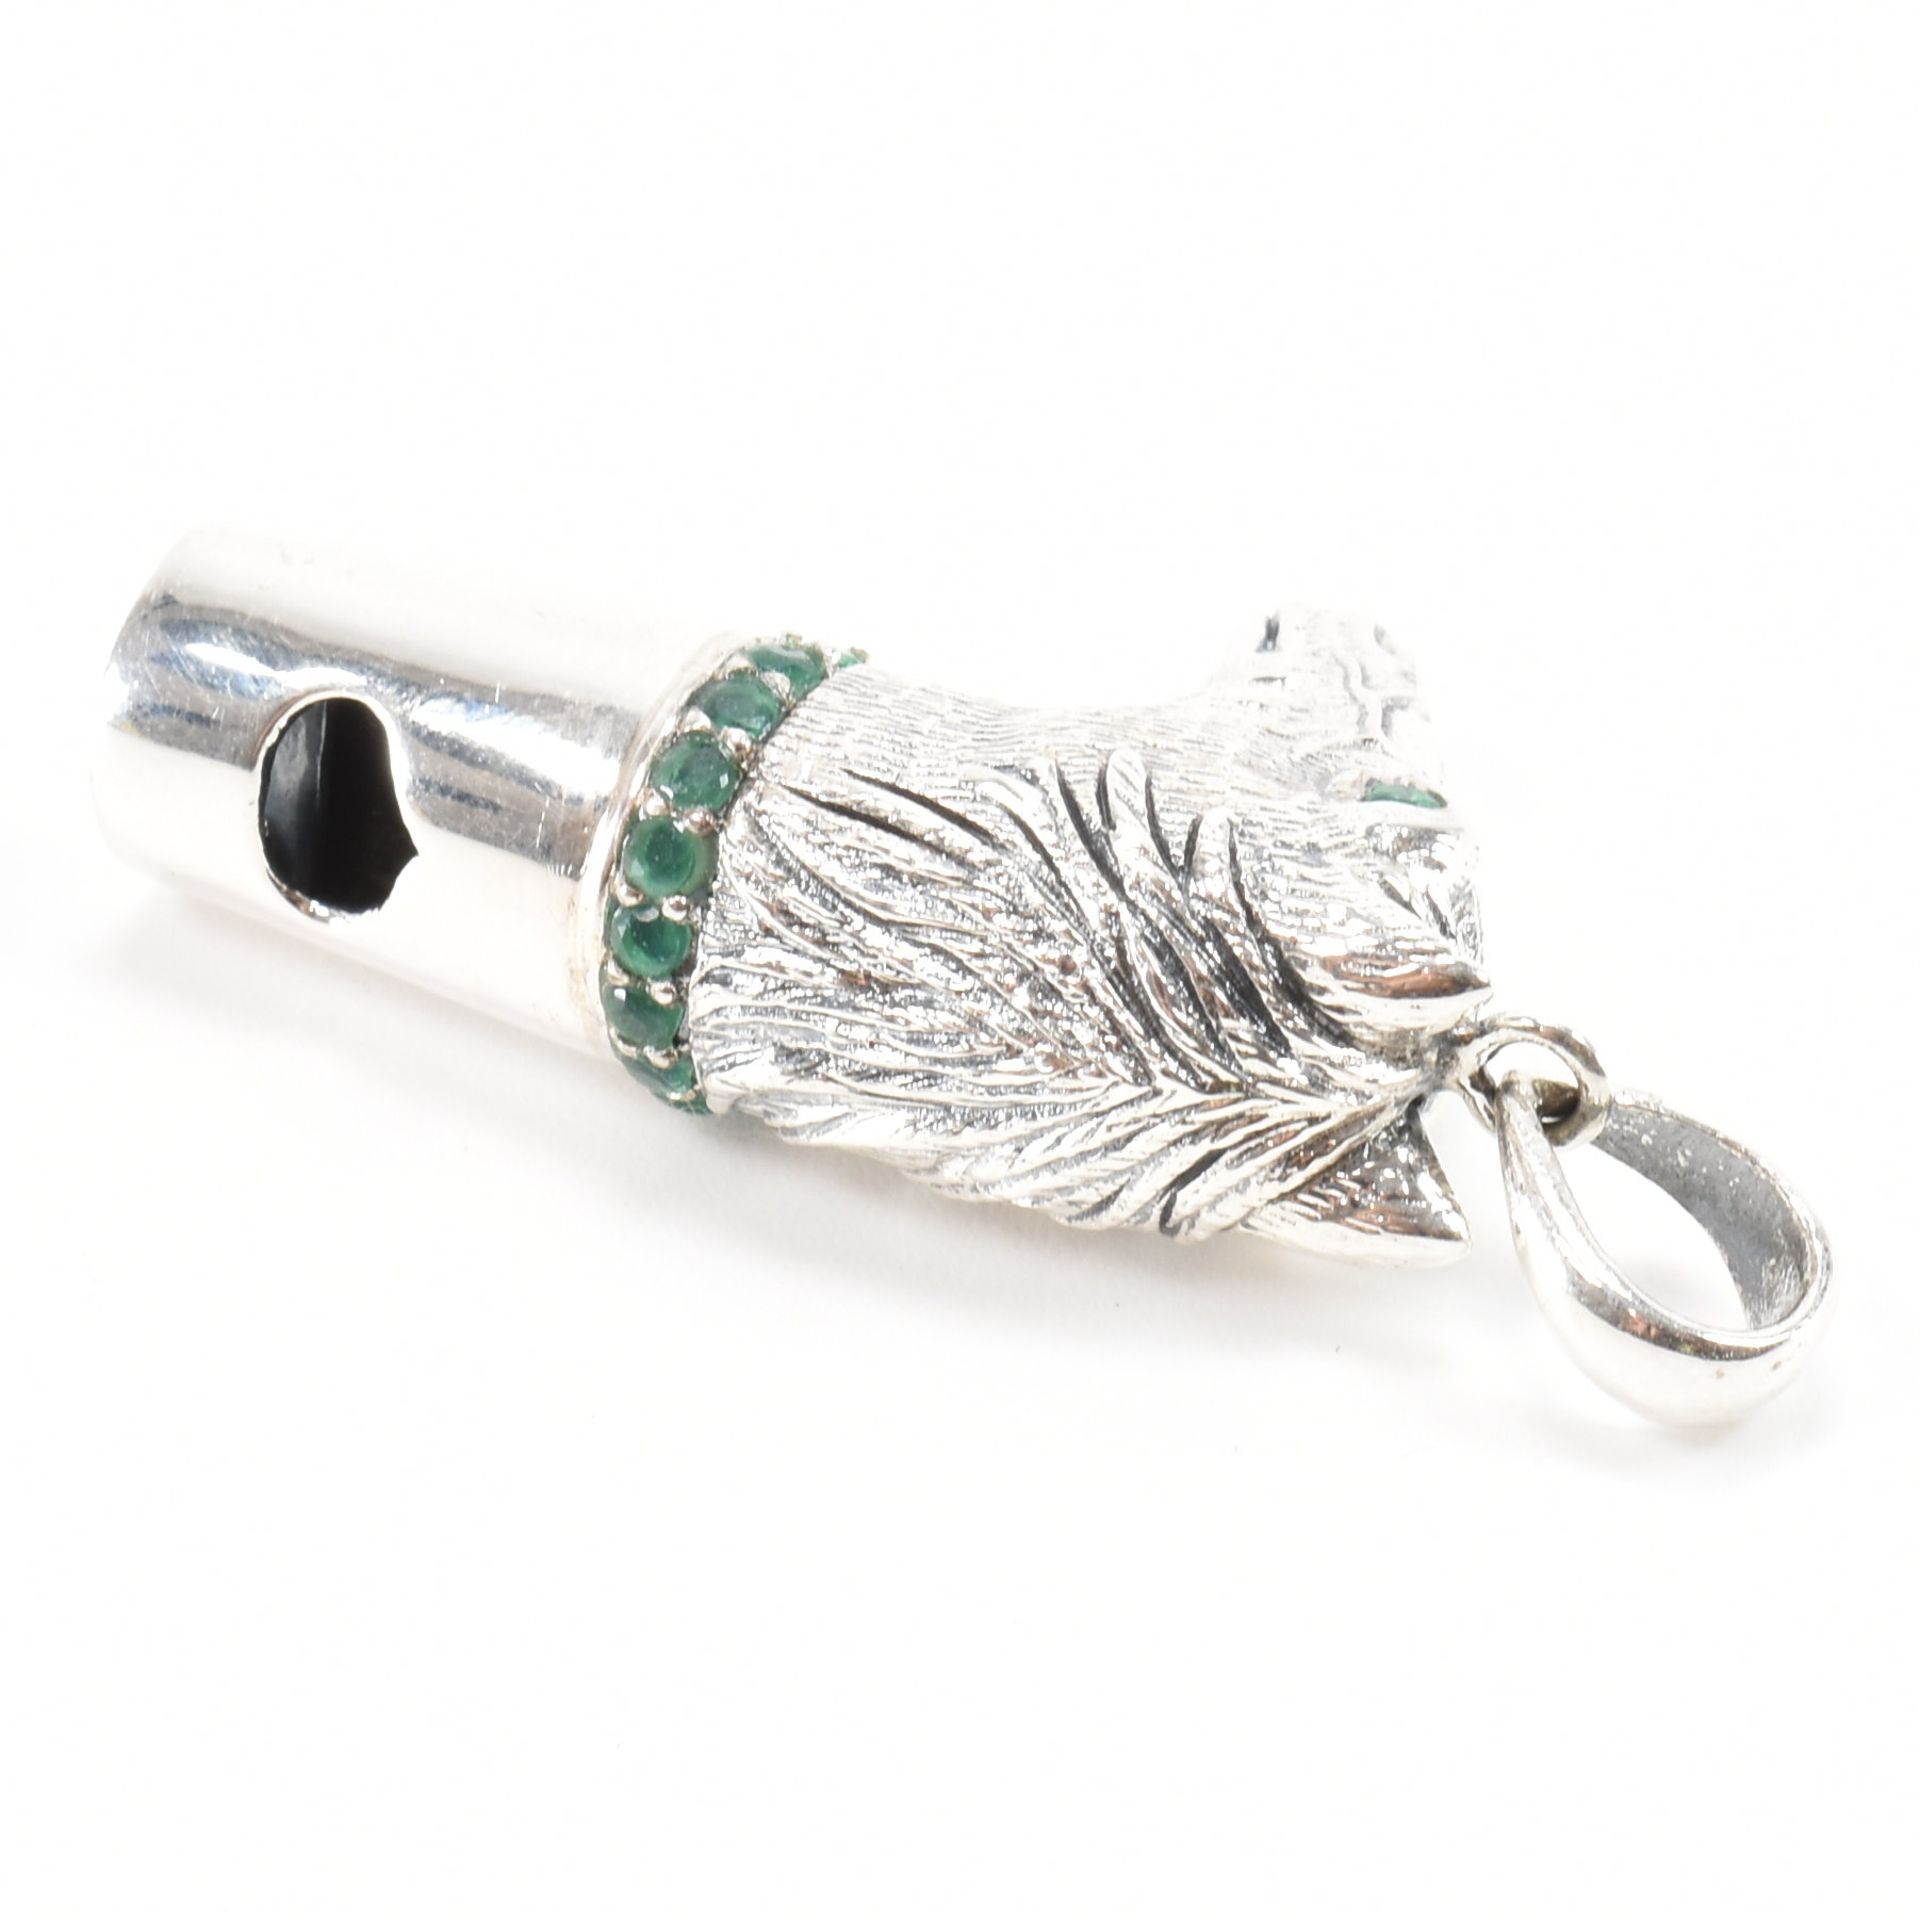 STERLING SILVER HORSES HEAD WHISTLE WITH GREEN STONE DETAILING - Image 3 of 3